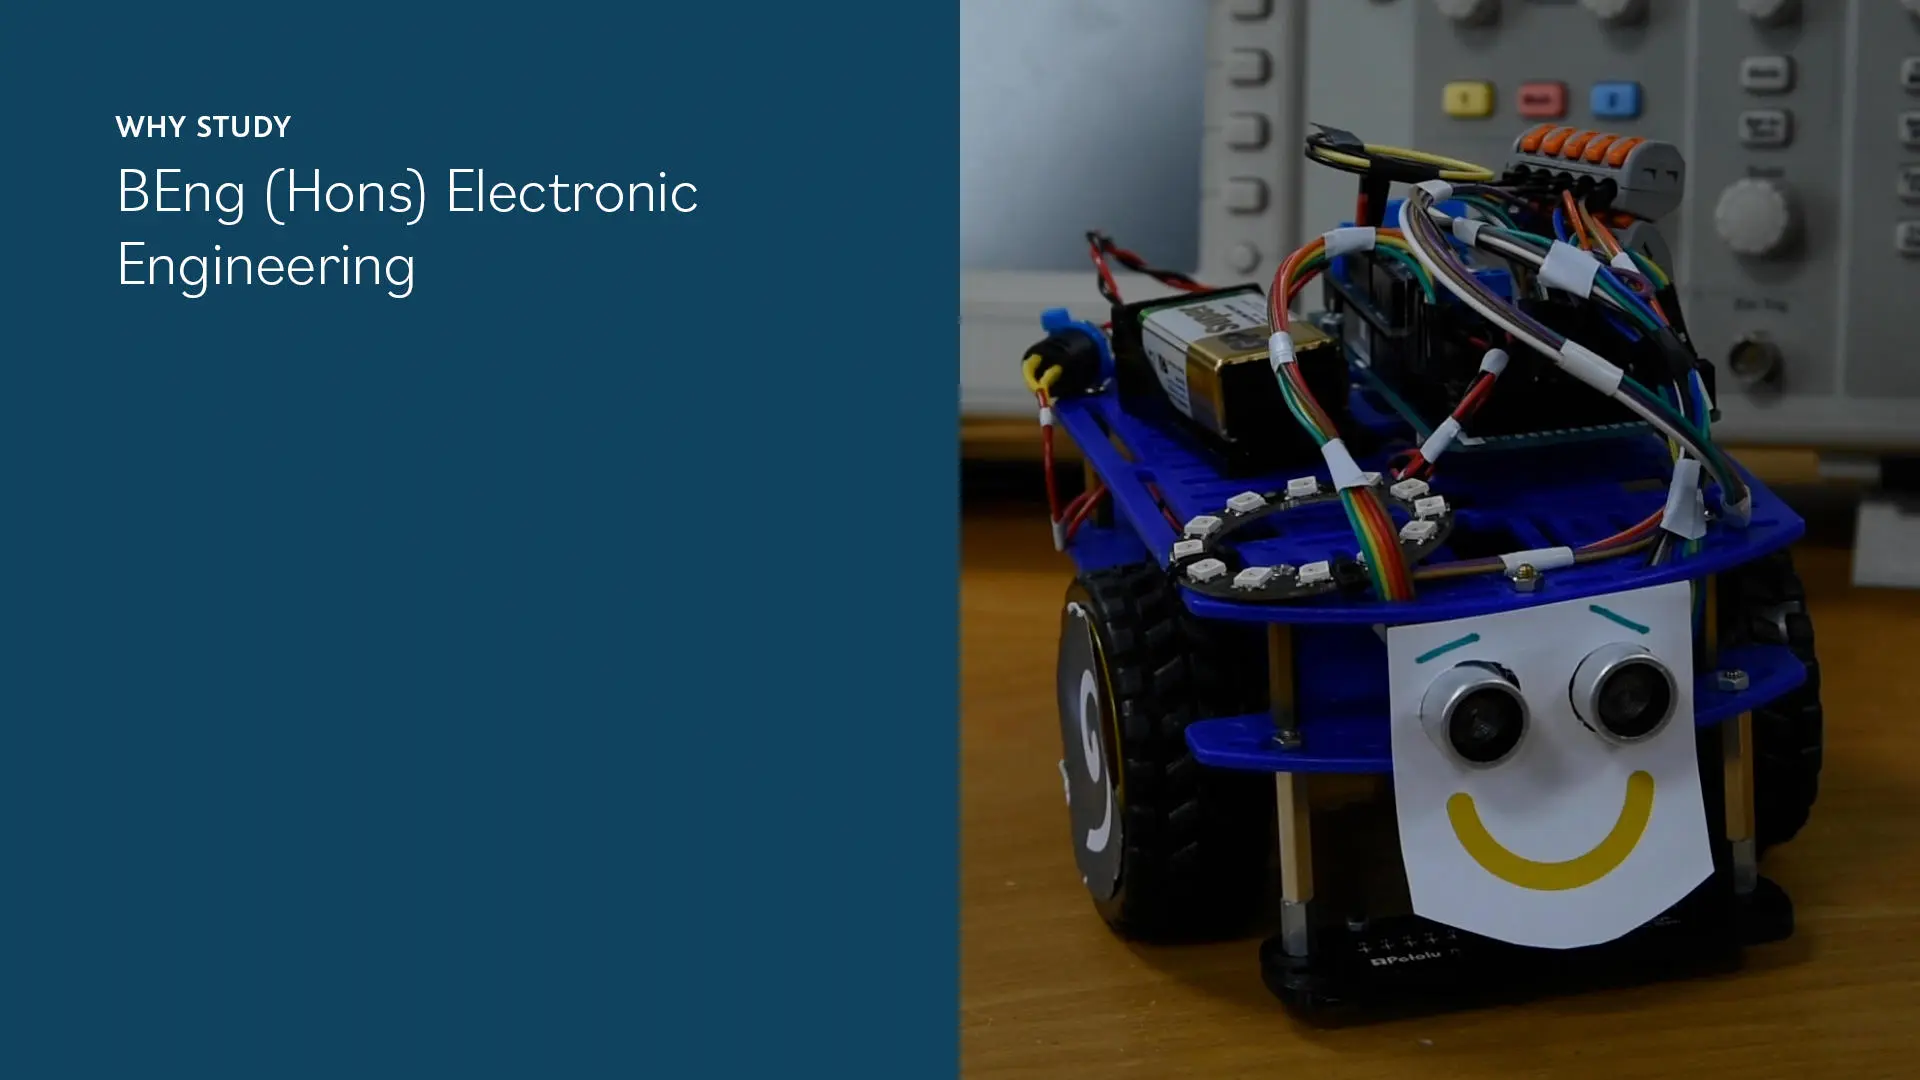 Image of a student-made robot with a smiley face, alongside text that says 'Why study BEng (Hons) Electronic Engineering'. 